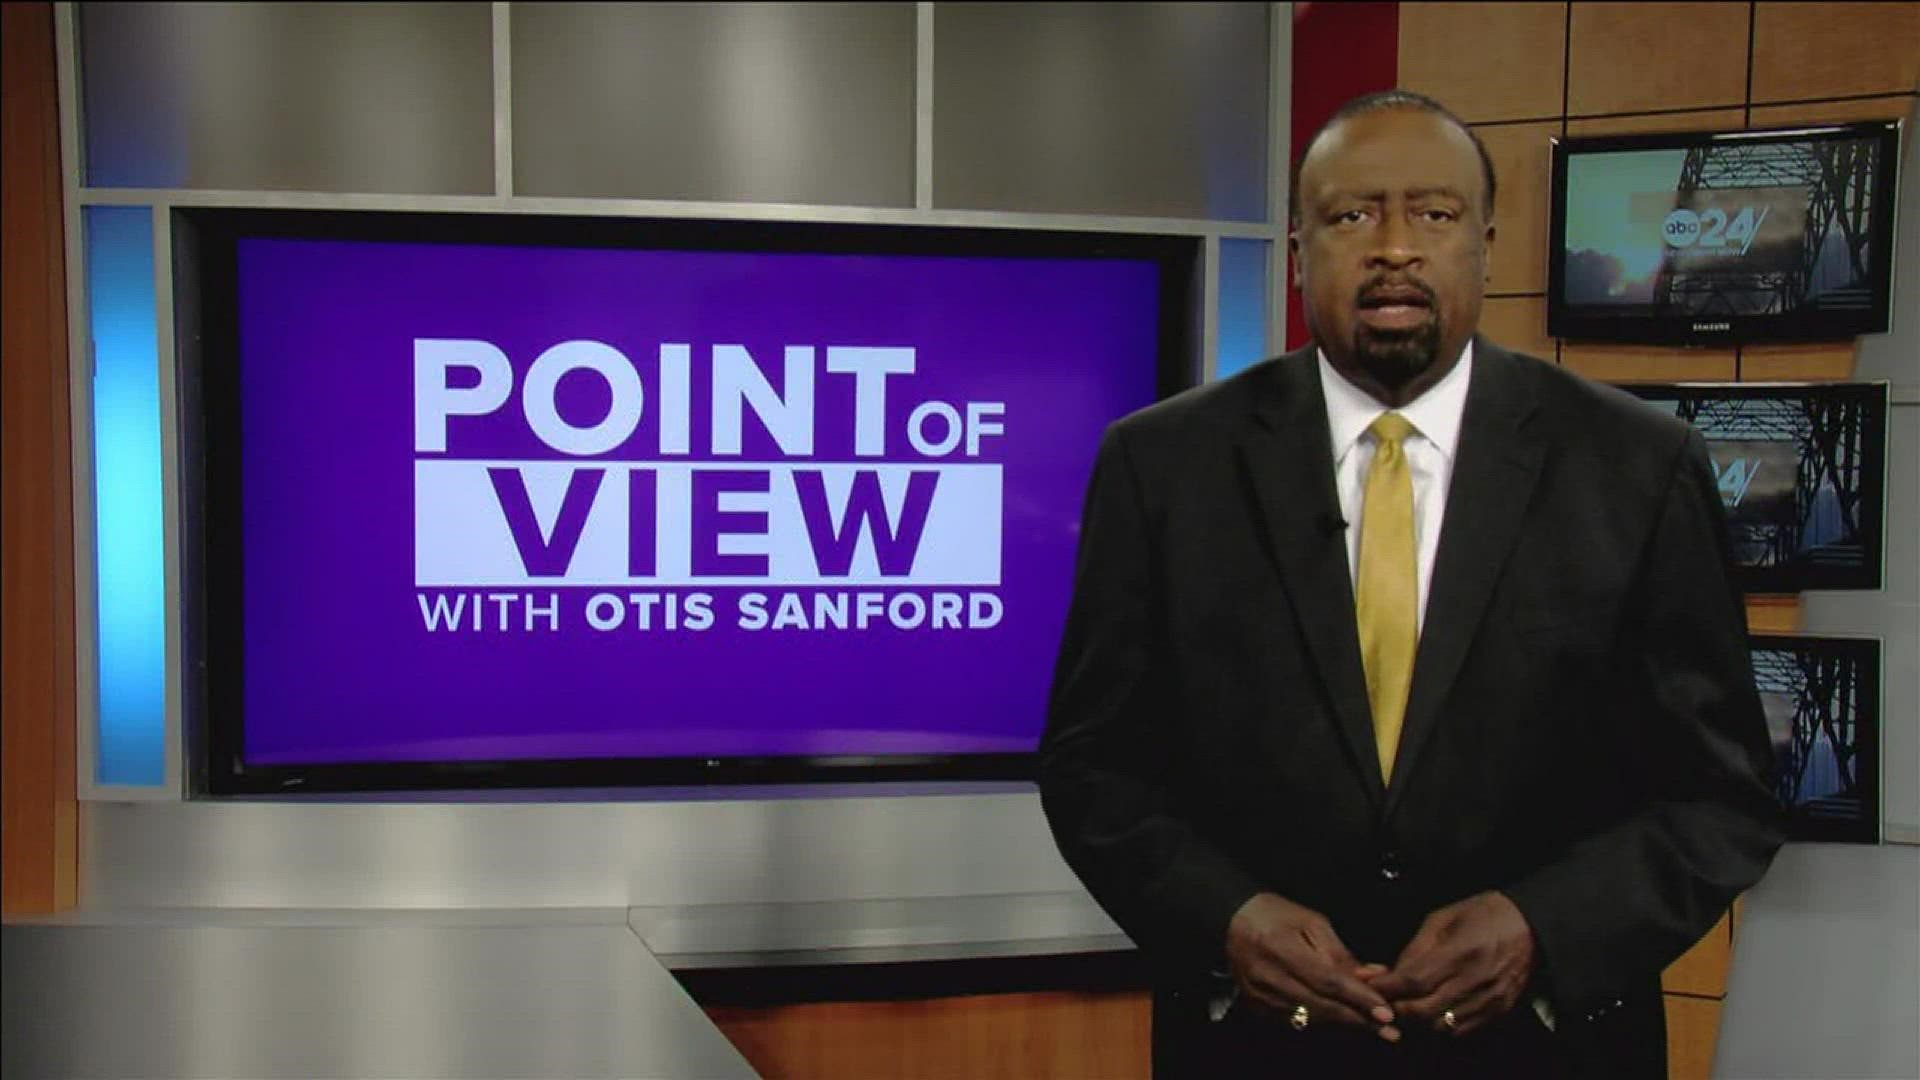 Political analyst and commentator Otis Sanford shared his point of view on redistricting in Shelby County.